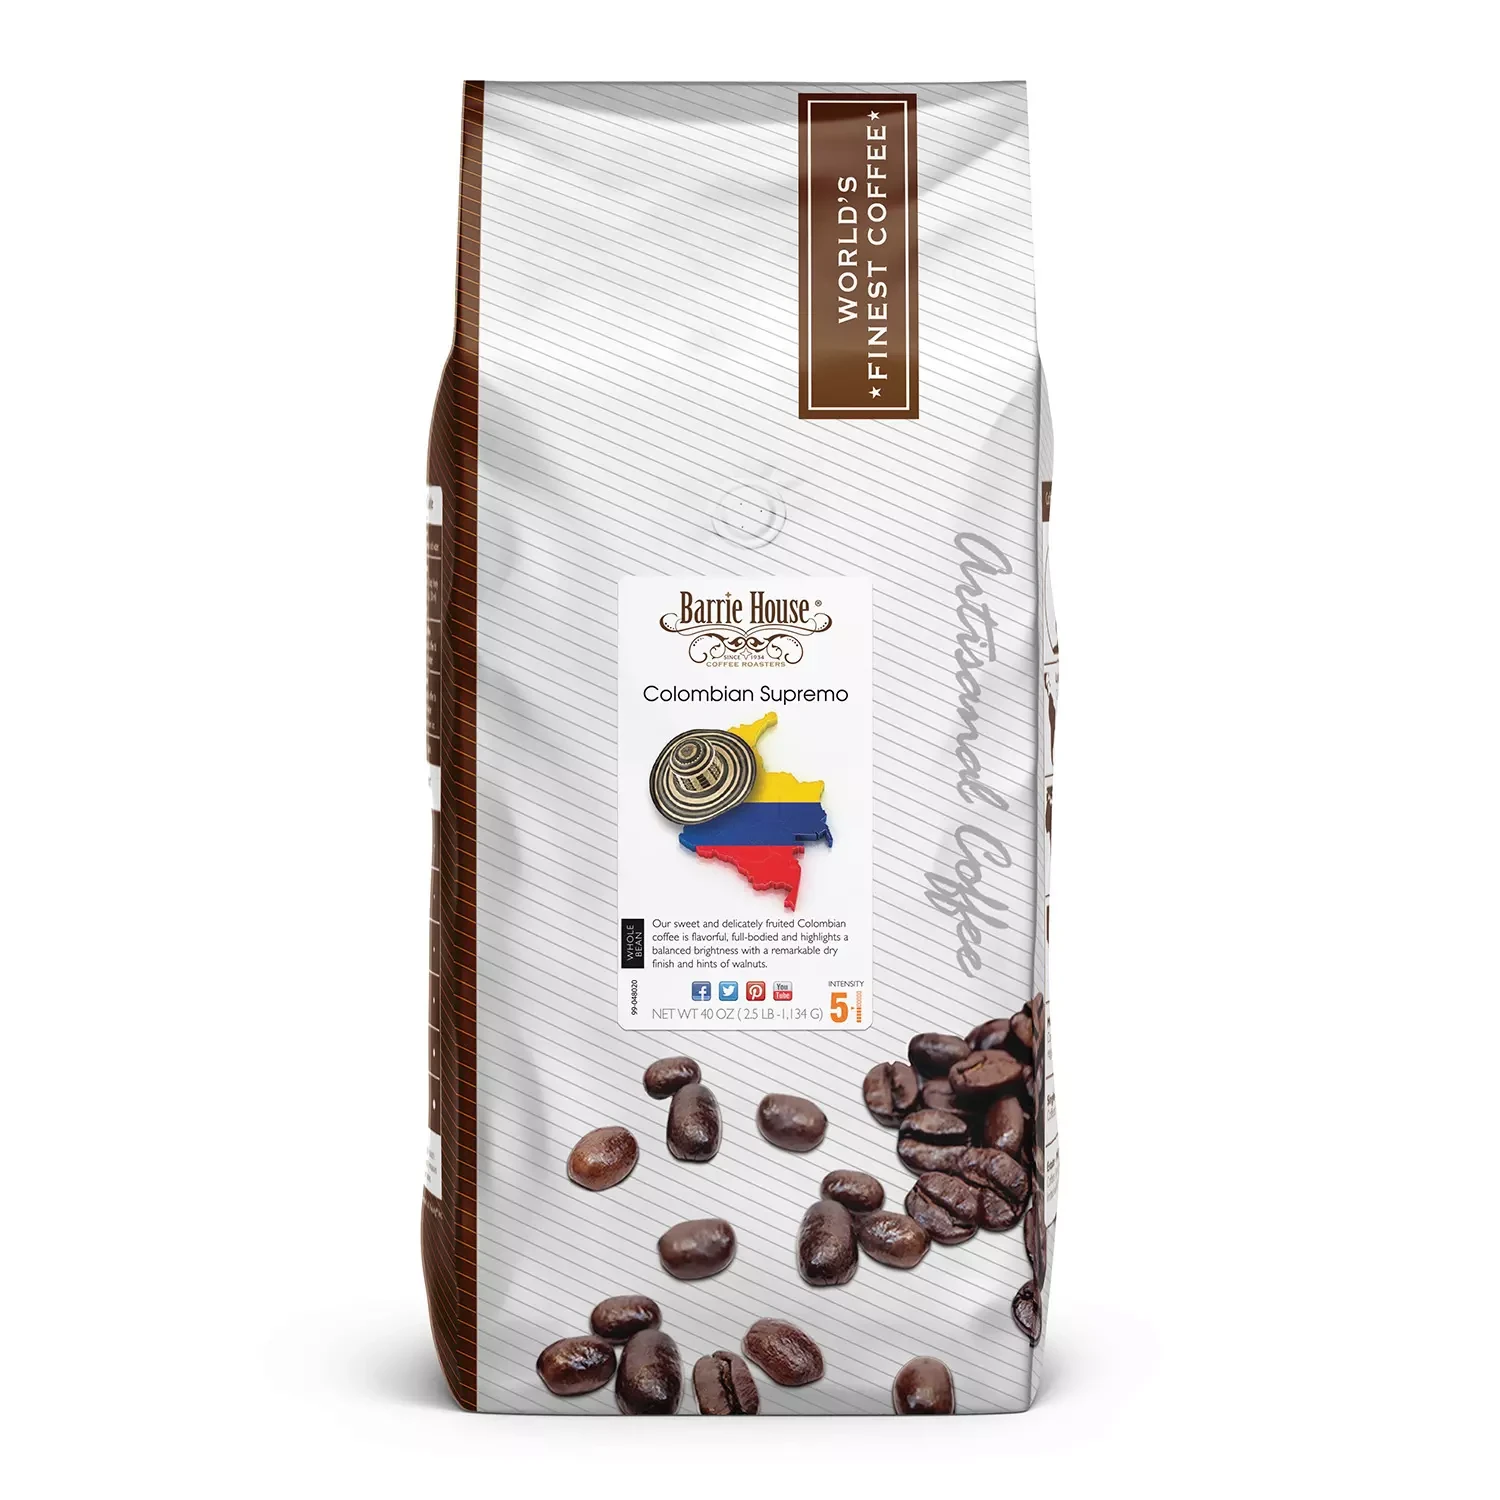 [SET OF 3] - Barrie House Whole Bean Coffee, Colombian Supremo (40 oz.),